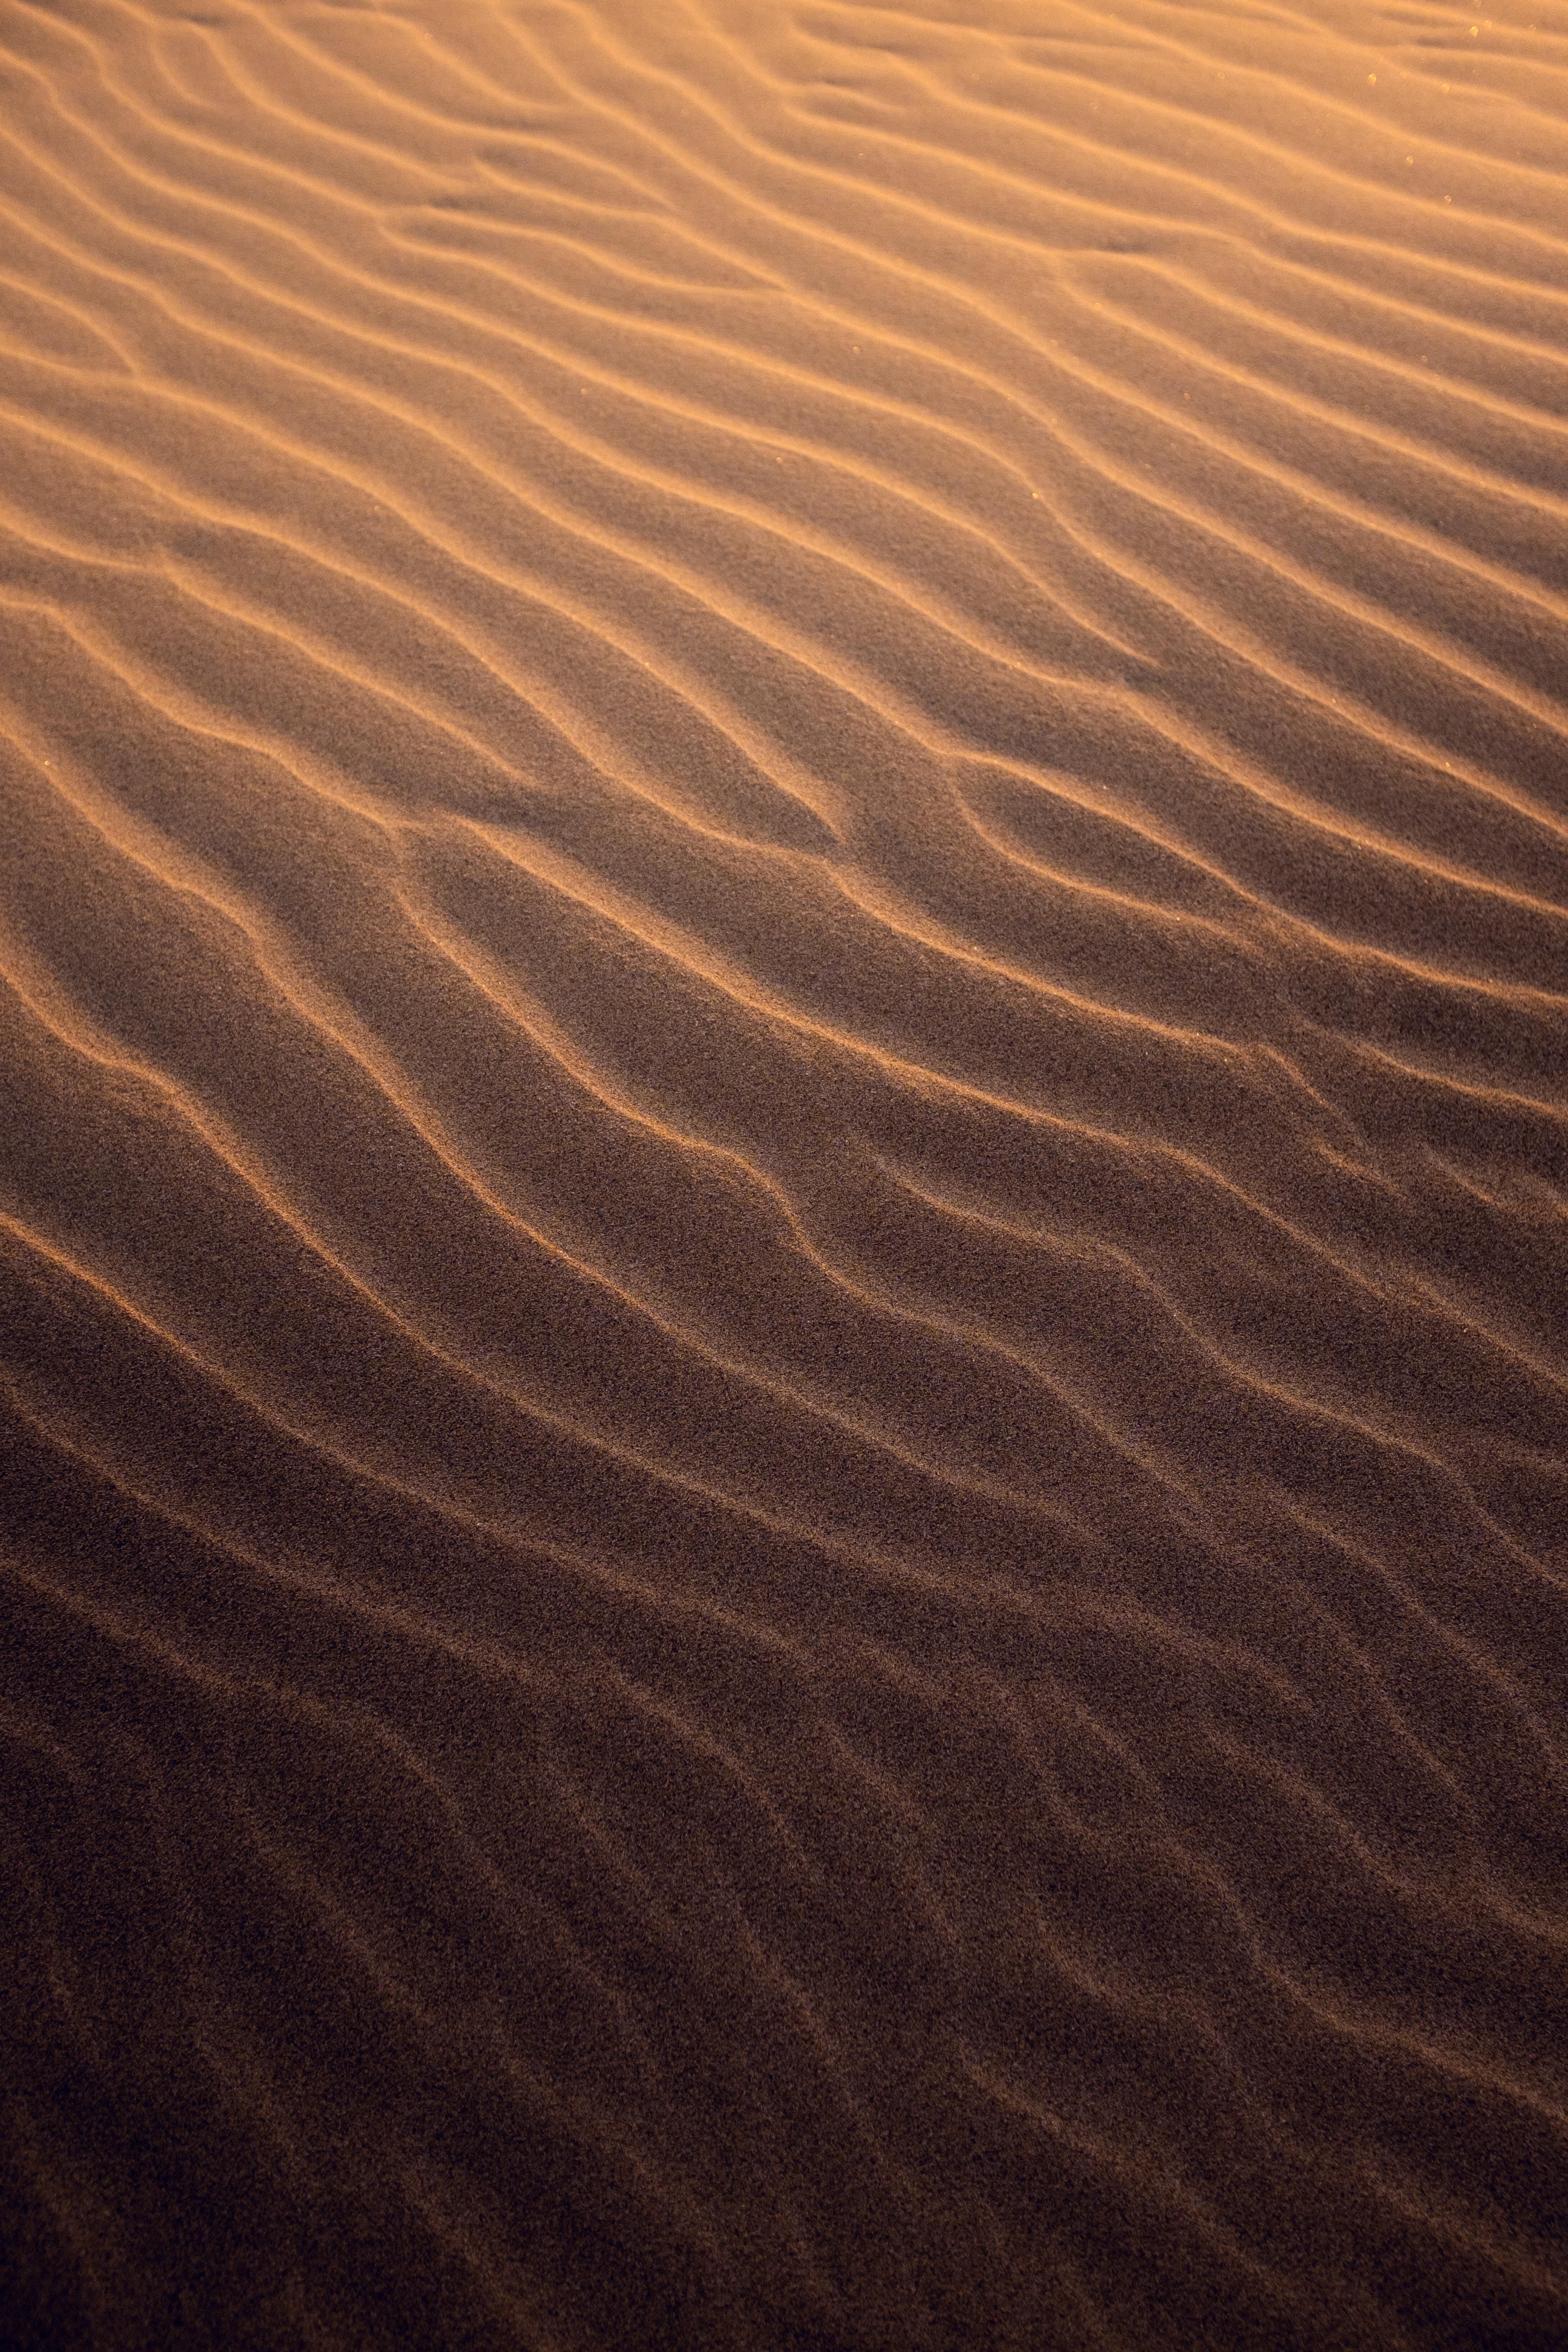 textures, waves, sand, ripples, ripple, texture, brown Image for desktop